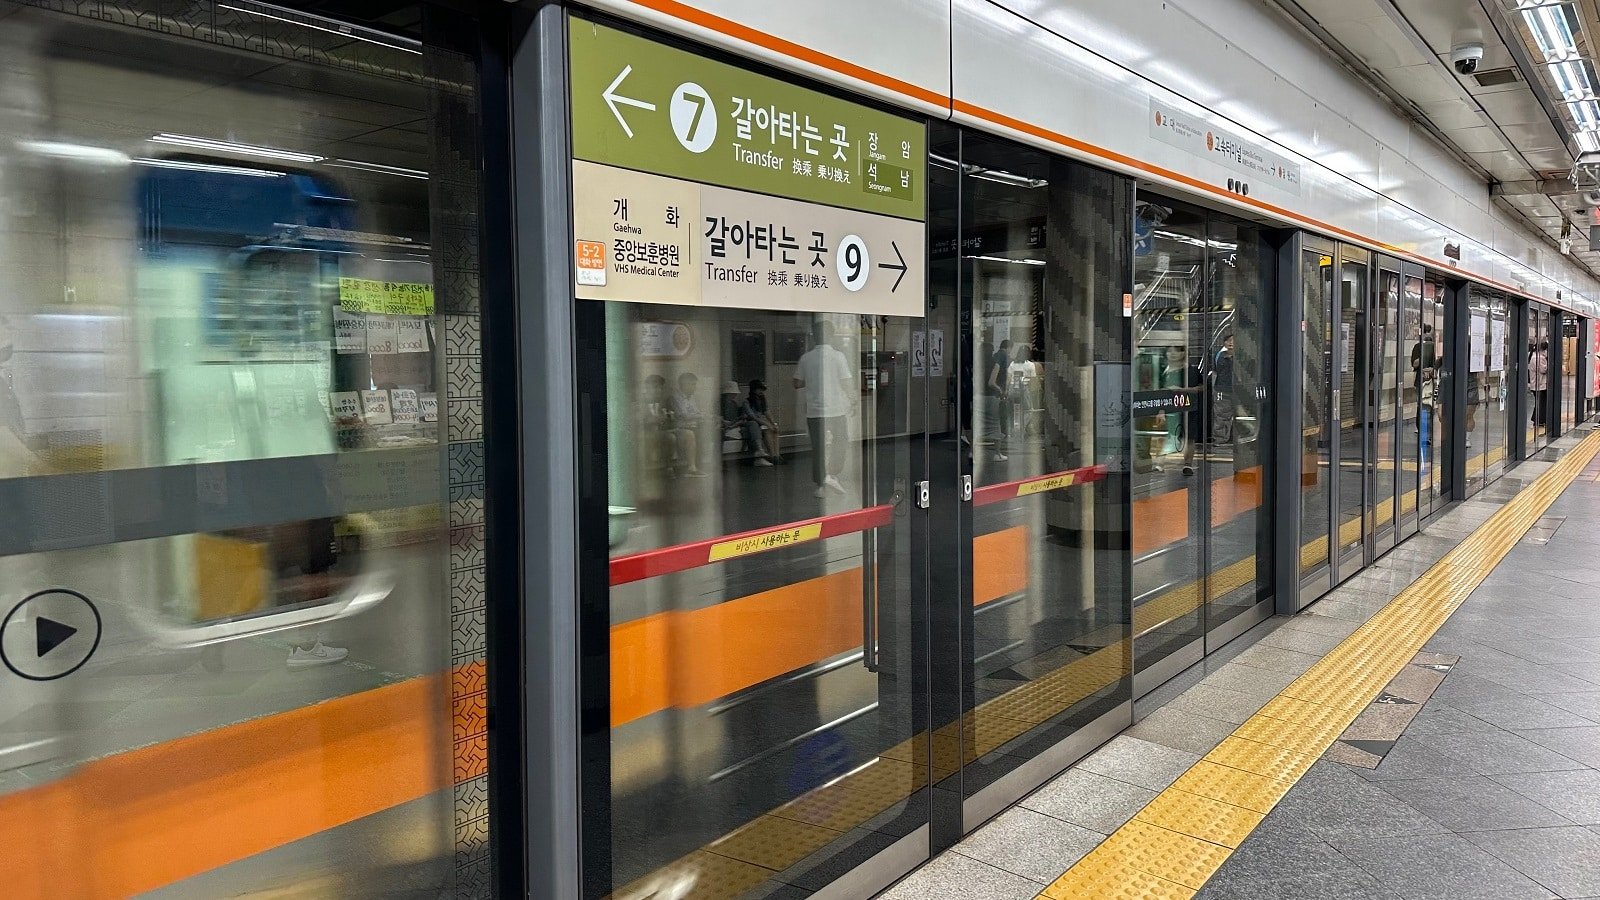 <p><span>Seoul’s subway system is known for its cleanliness, efficiency, and extensive network. It’s the most convenient way to get around the city and reach major attractions. </span></p> <p><b>Insider’s Tip: </b><span>Use a T-Money card for discounted fares and seamless transfers between different lines. </span></p> <p><b>When to Travel: </b><span>Avoid travel during rush hours in the morning and late afternoon. </span></p>